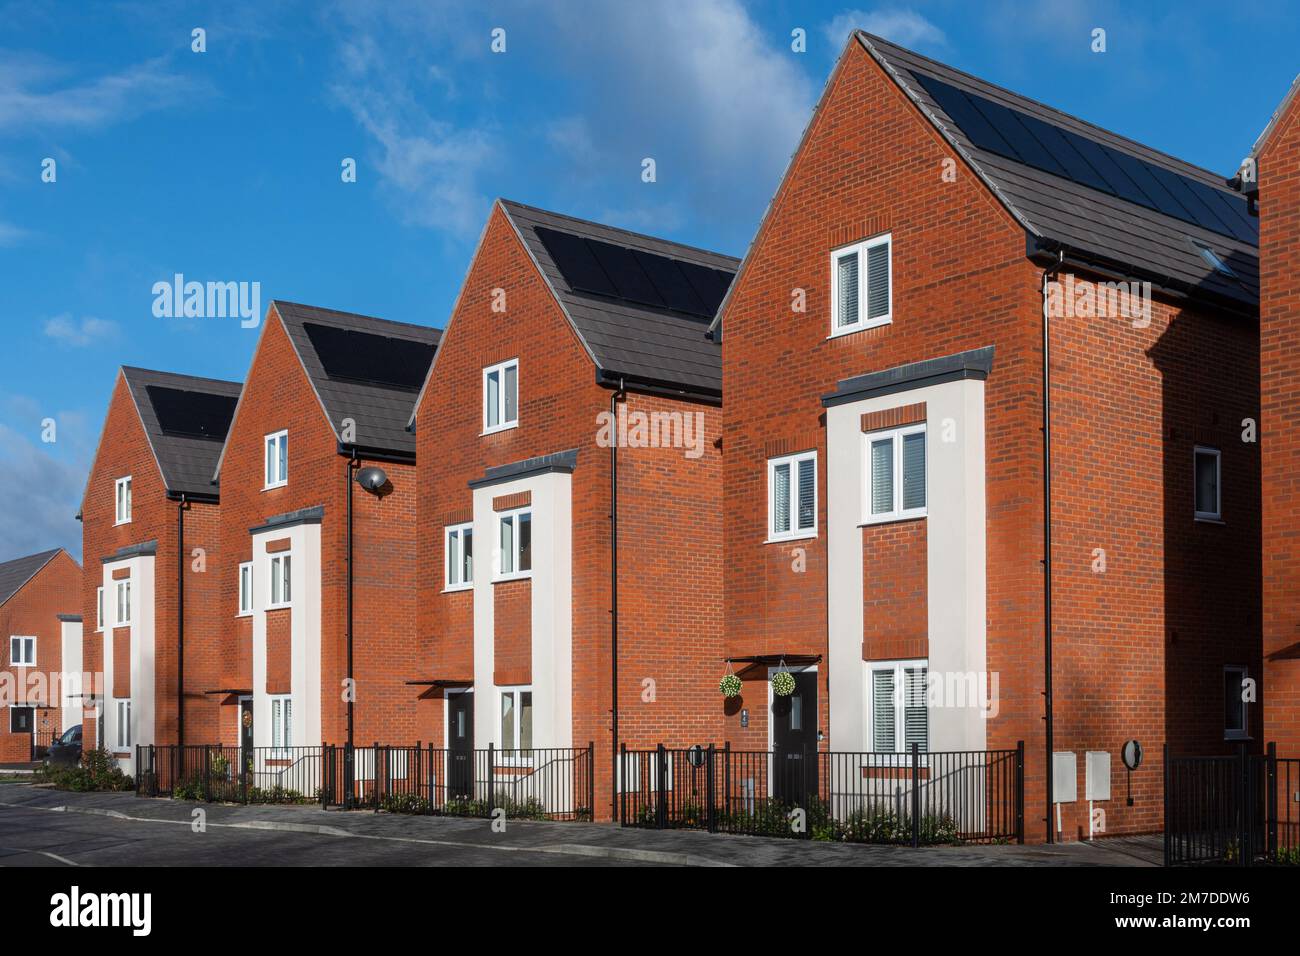 New houses with solar panels, Cala Homes housing development called Southwood Mews in Farnborough town, Hampshire, England, UK, January 2022 Stock Photo